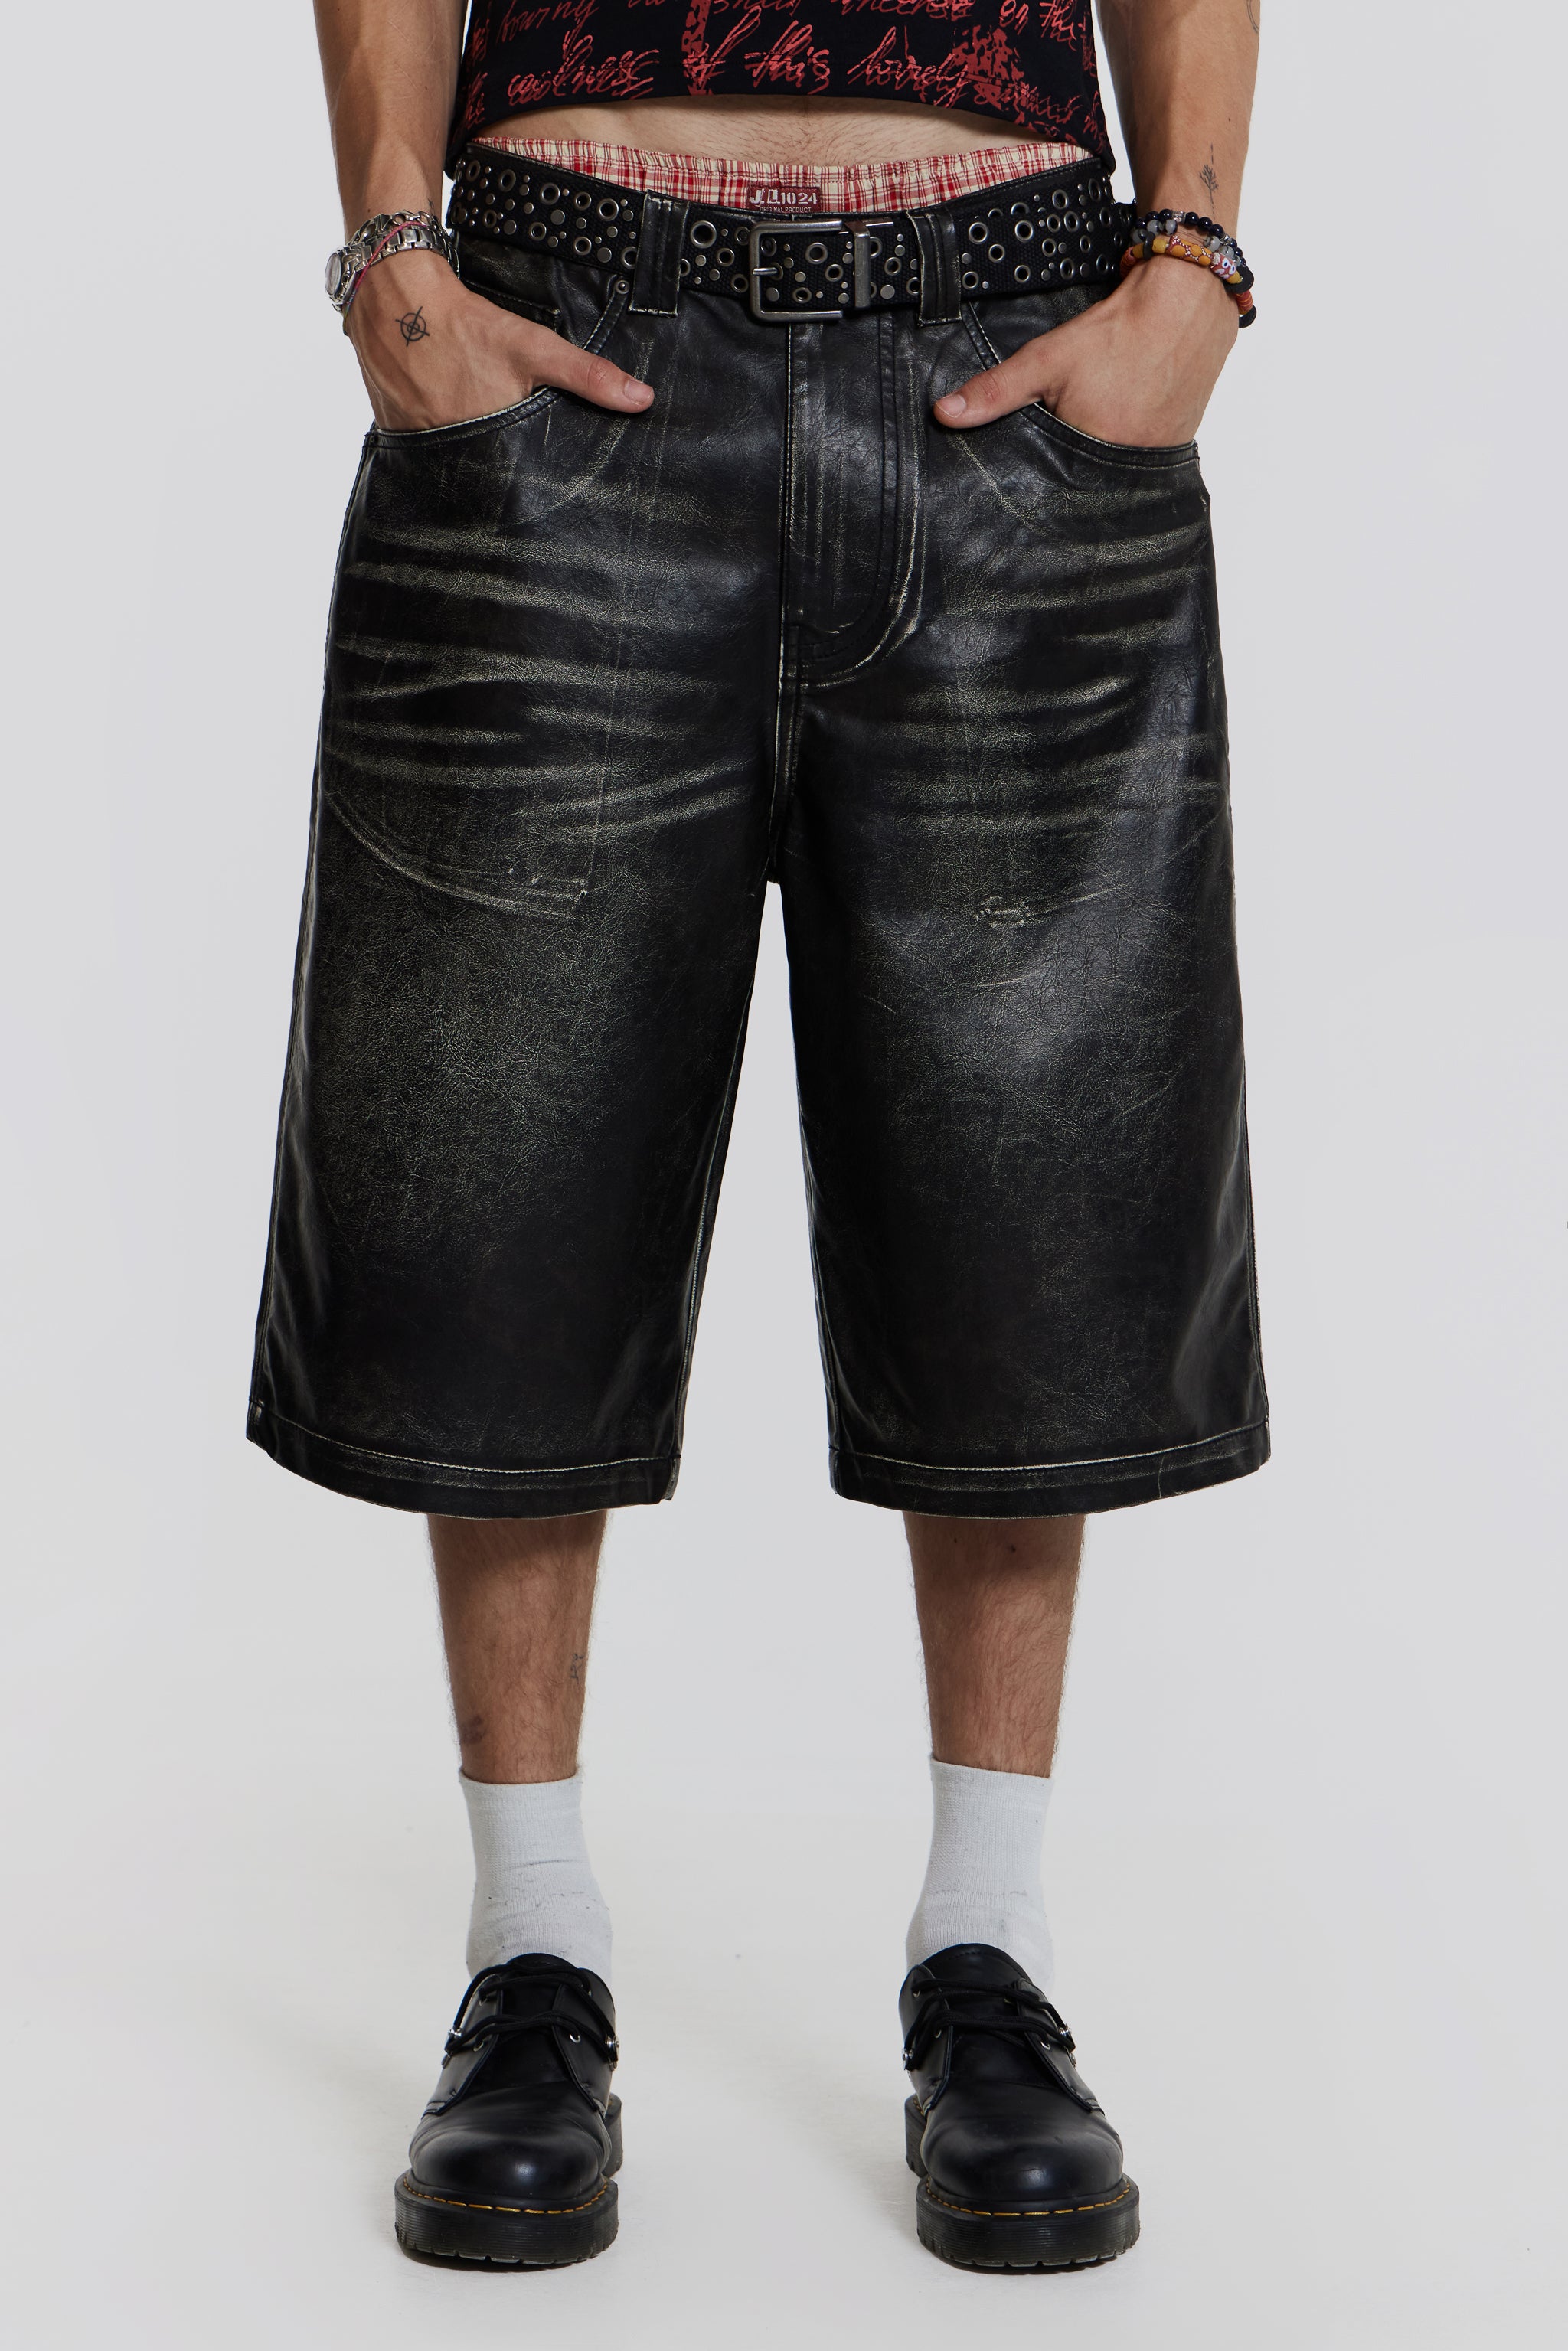 Jaded London Ash Faux Leather Colossus Shorts